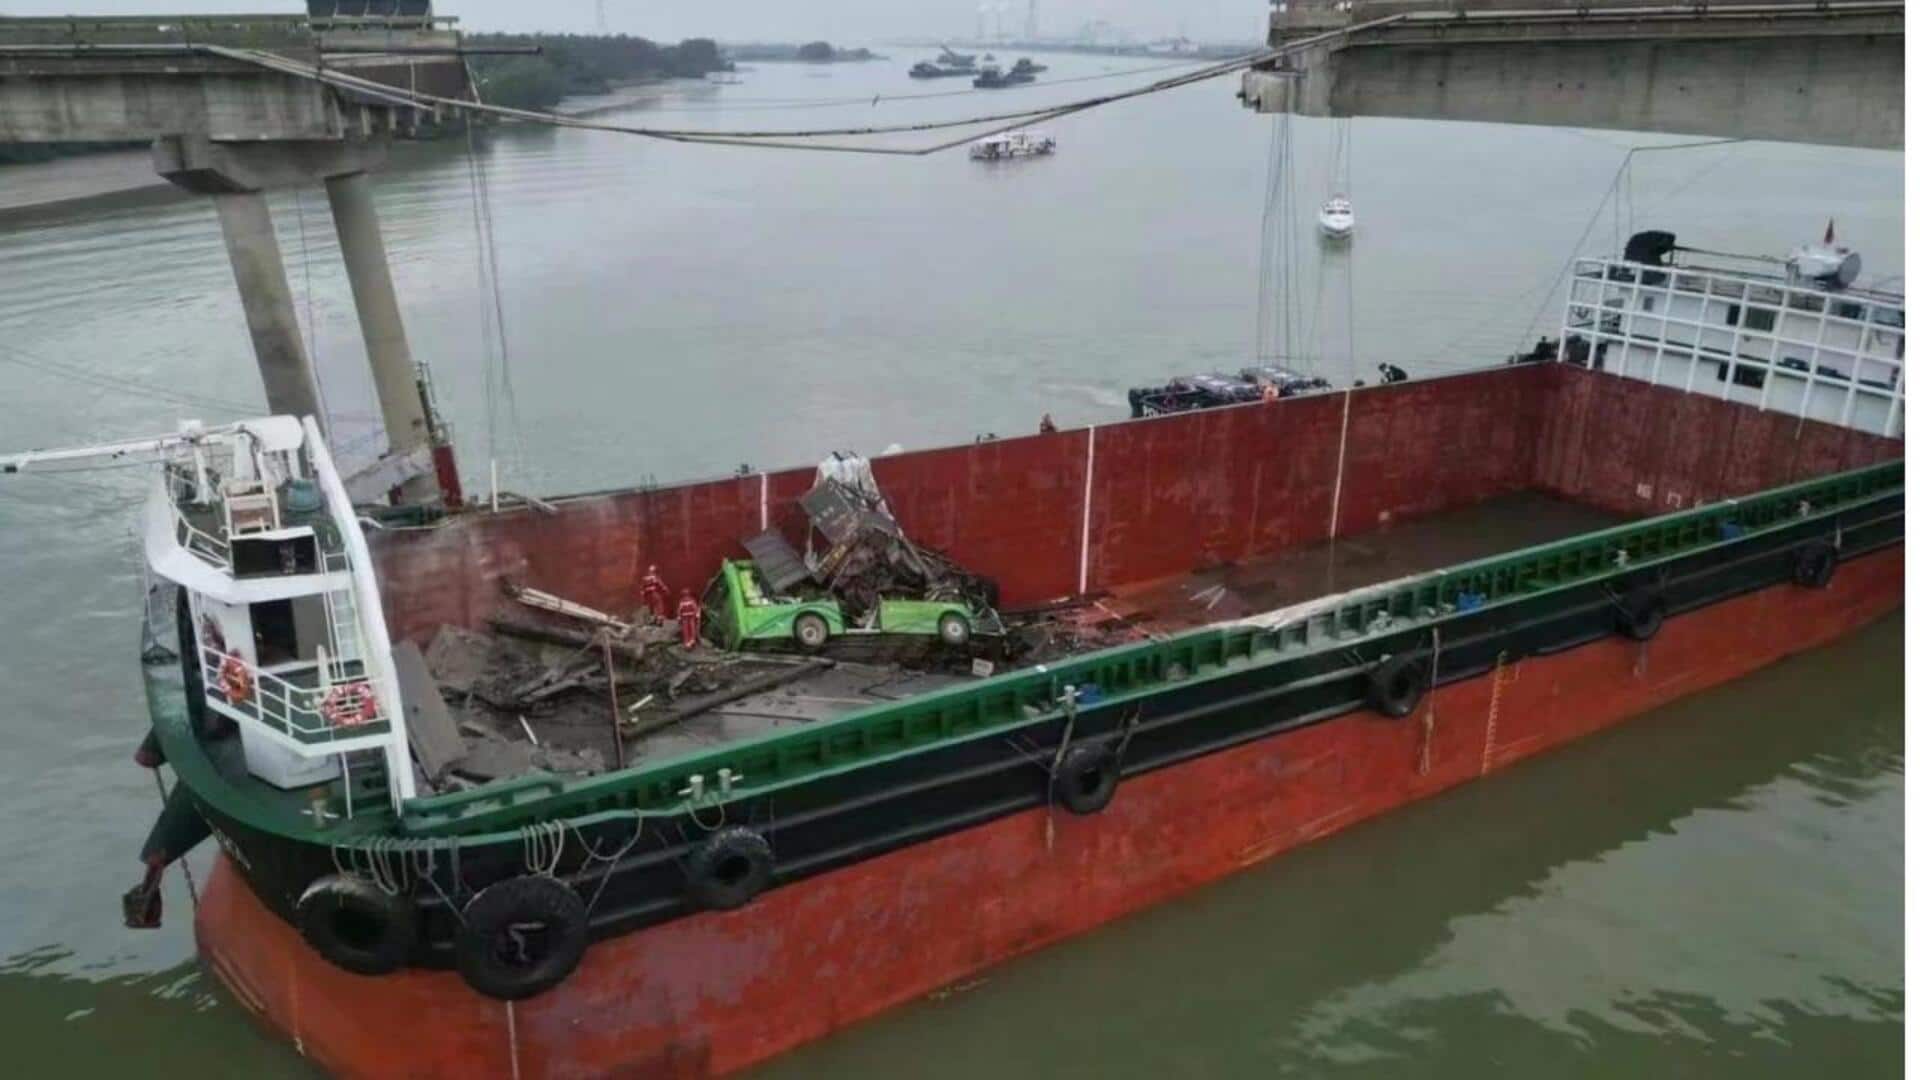 Five dead as cargo ship collides with bridge in China